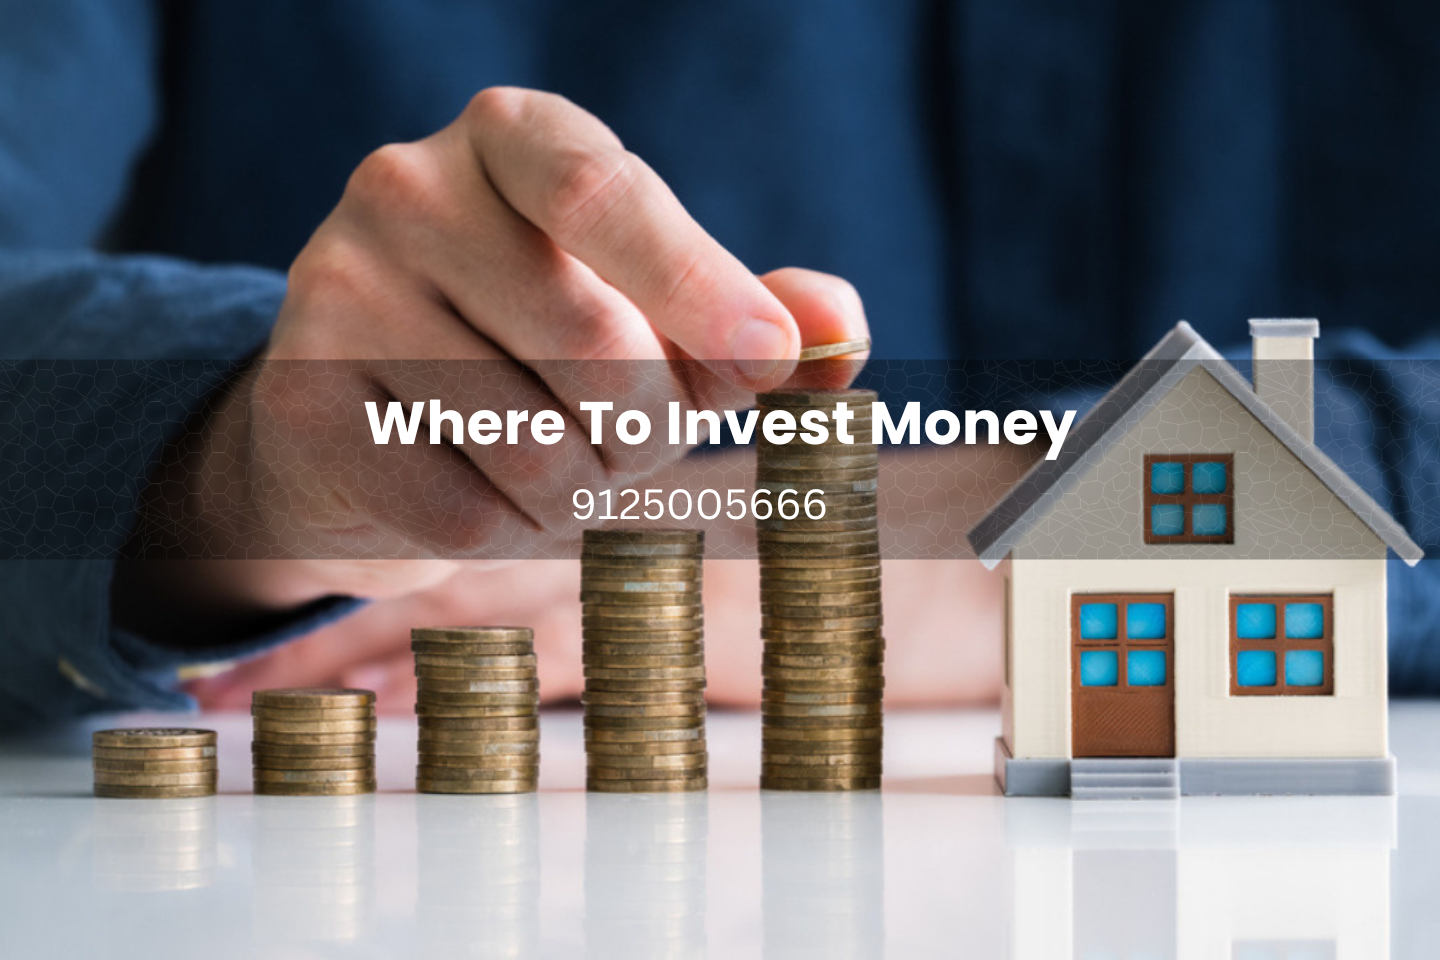 Where to Invest Money